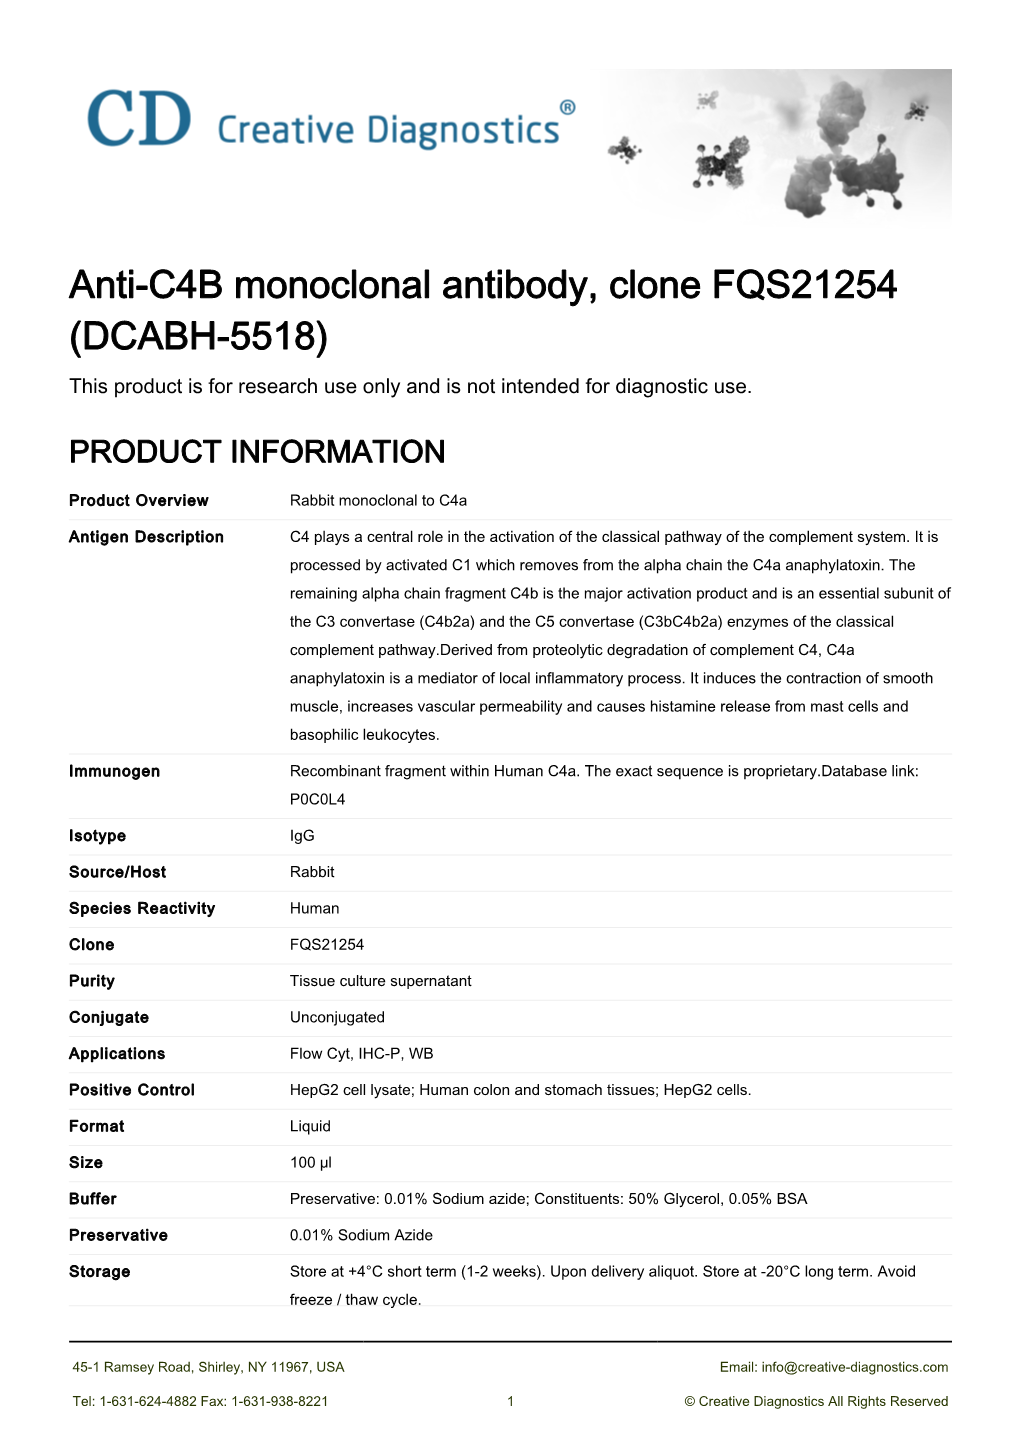 Anti-C4B Monoclonal Antibody, Clone FQS21254 (DCABH-5518) This Product Is for Research Use Only and Is Not Intended for Diagnostic Use